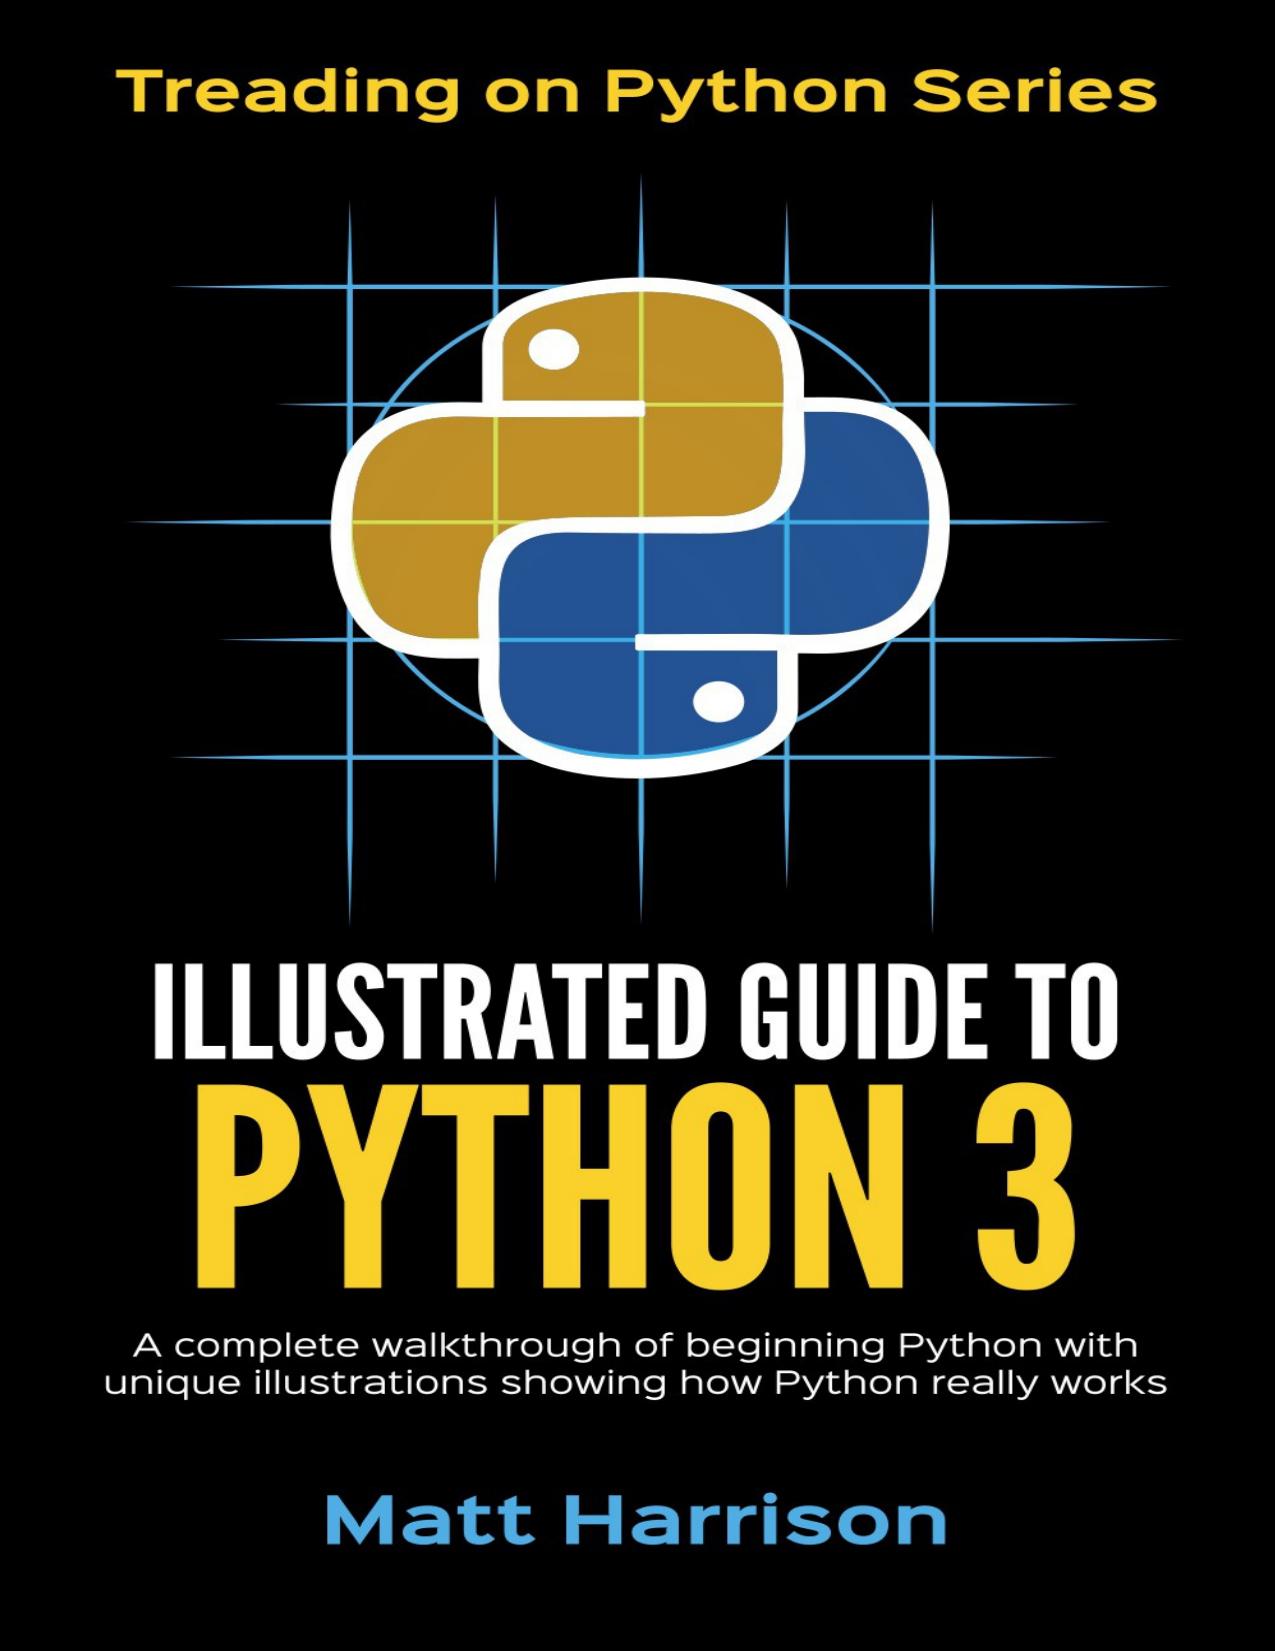 Illustrated Guide to Python 3: A Complete Walkthrough of Beginning Python With Unique Illustrations Showing How Python Really Works. Now Covers Python 3.6 by Matt Harrison